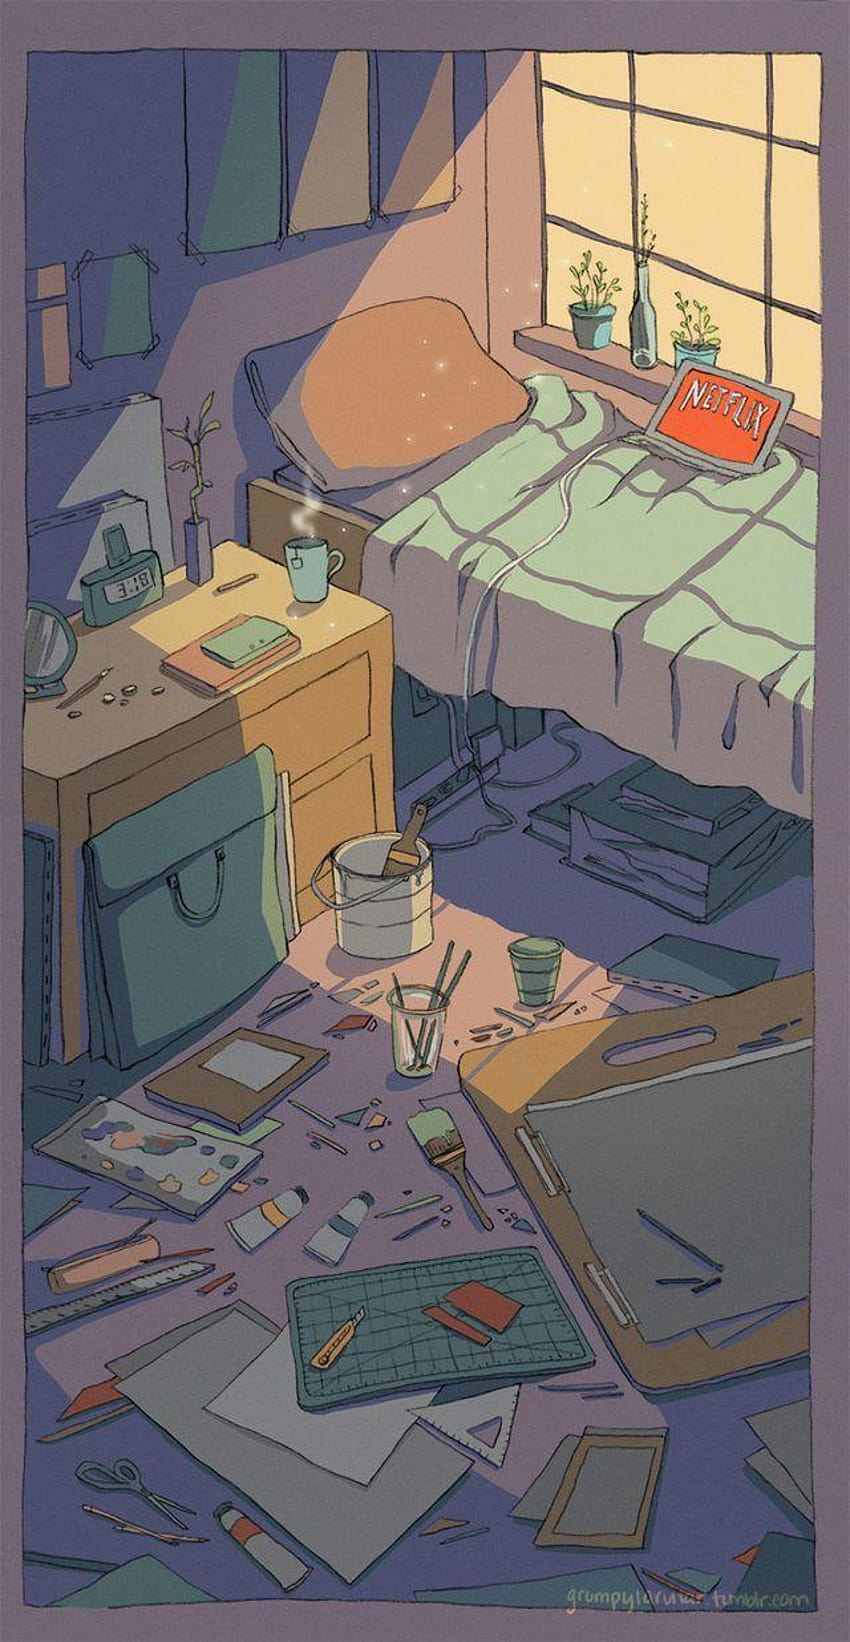 This reminds me of being a full time art school, aesthetic anime bedroom HD phone wallpaper